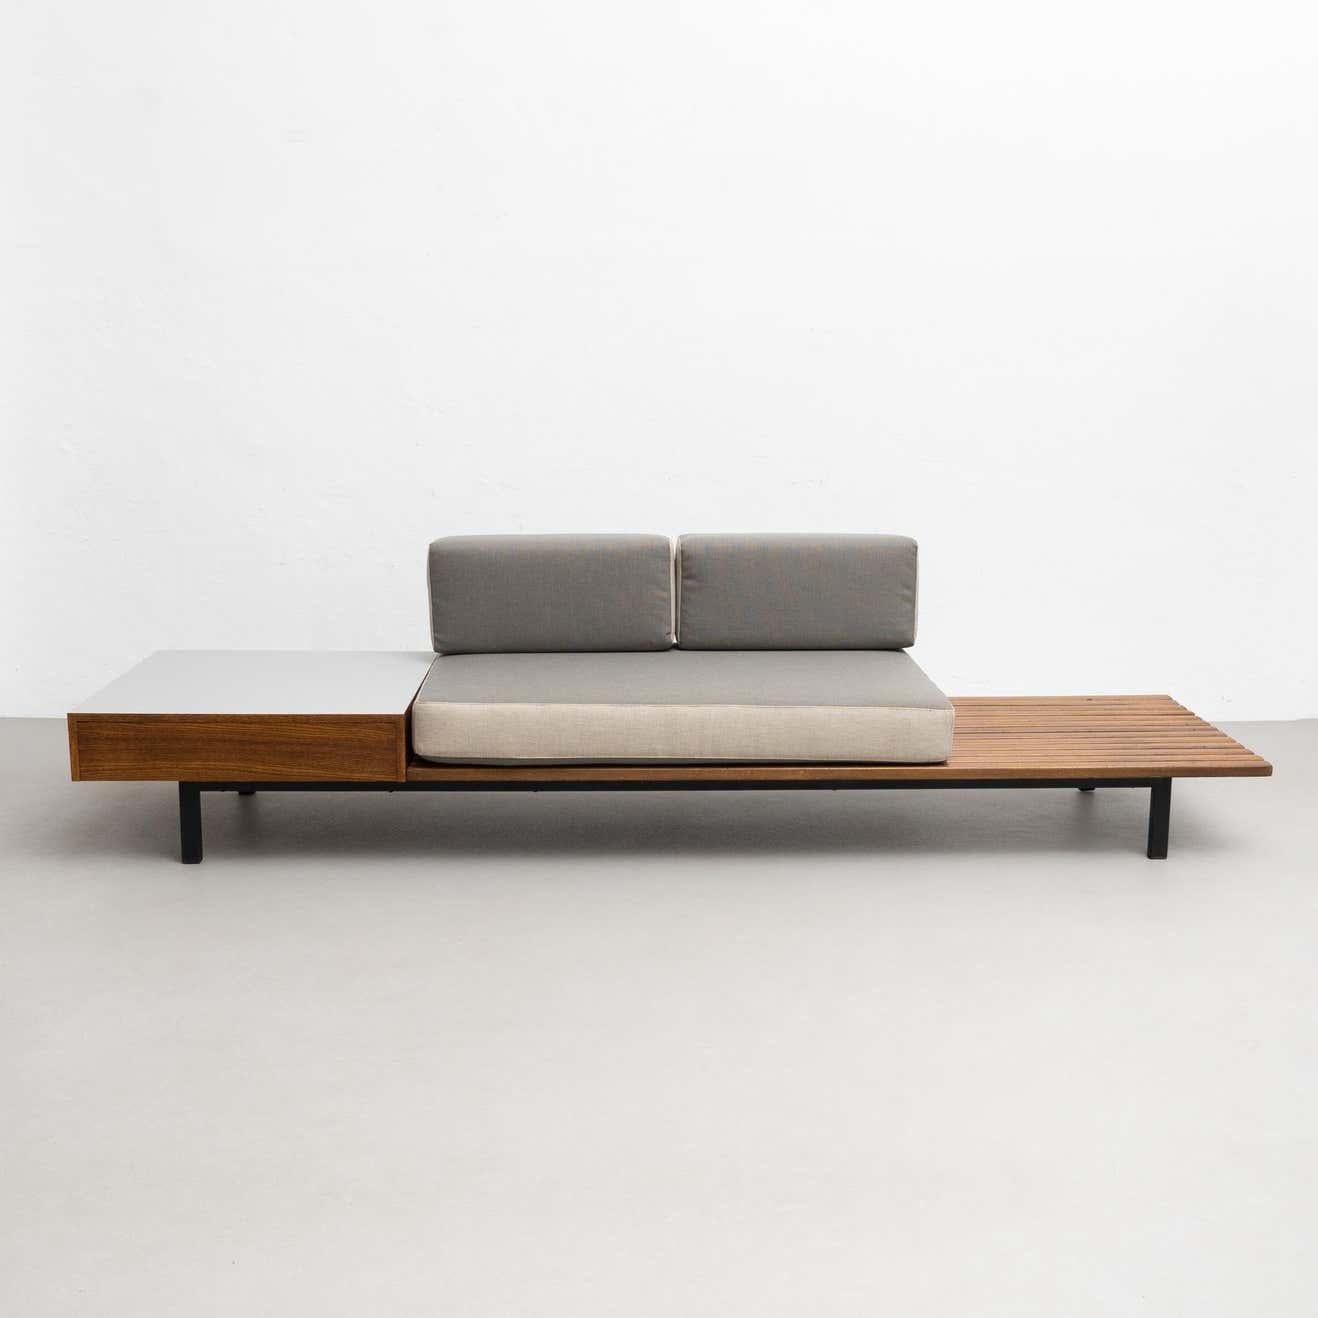 Metal Charlotte Perriand Cansado Bench with a Drawer, circa 1958 For Sale